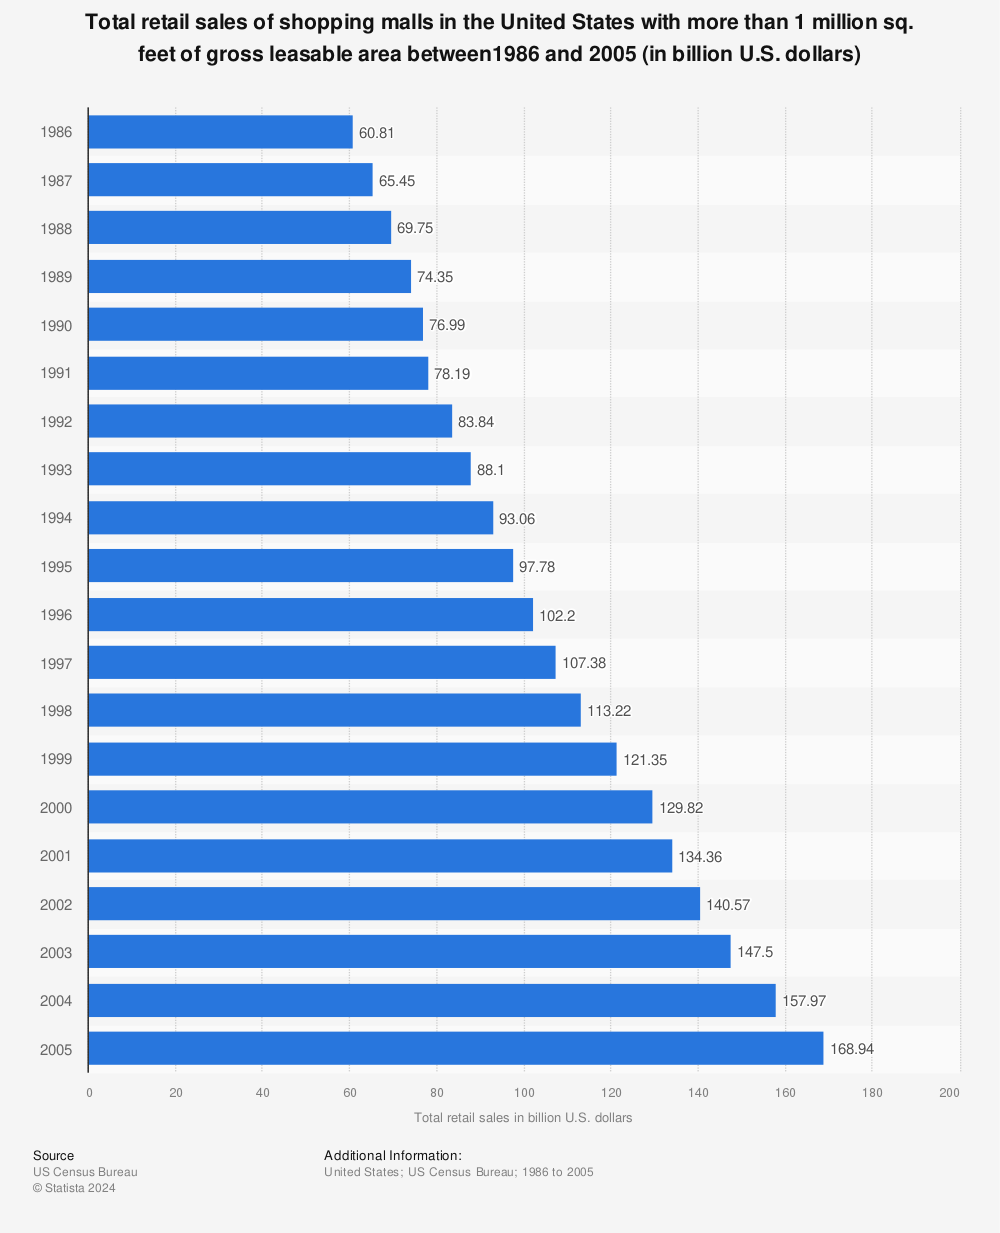 Statistic: Total retail sales of shopping malls in the United States with more than 1 million sq. feet of gross leasable area between1986 and 2005 (in billion U.S. dollars) | Statista